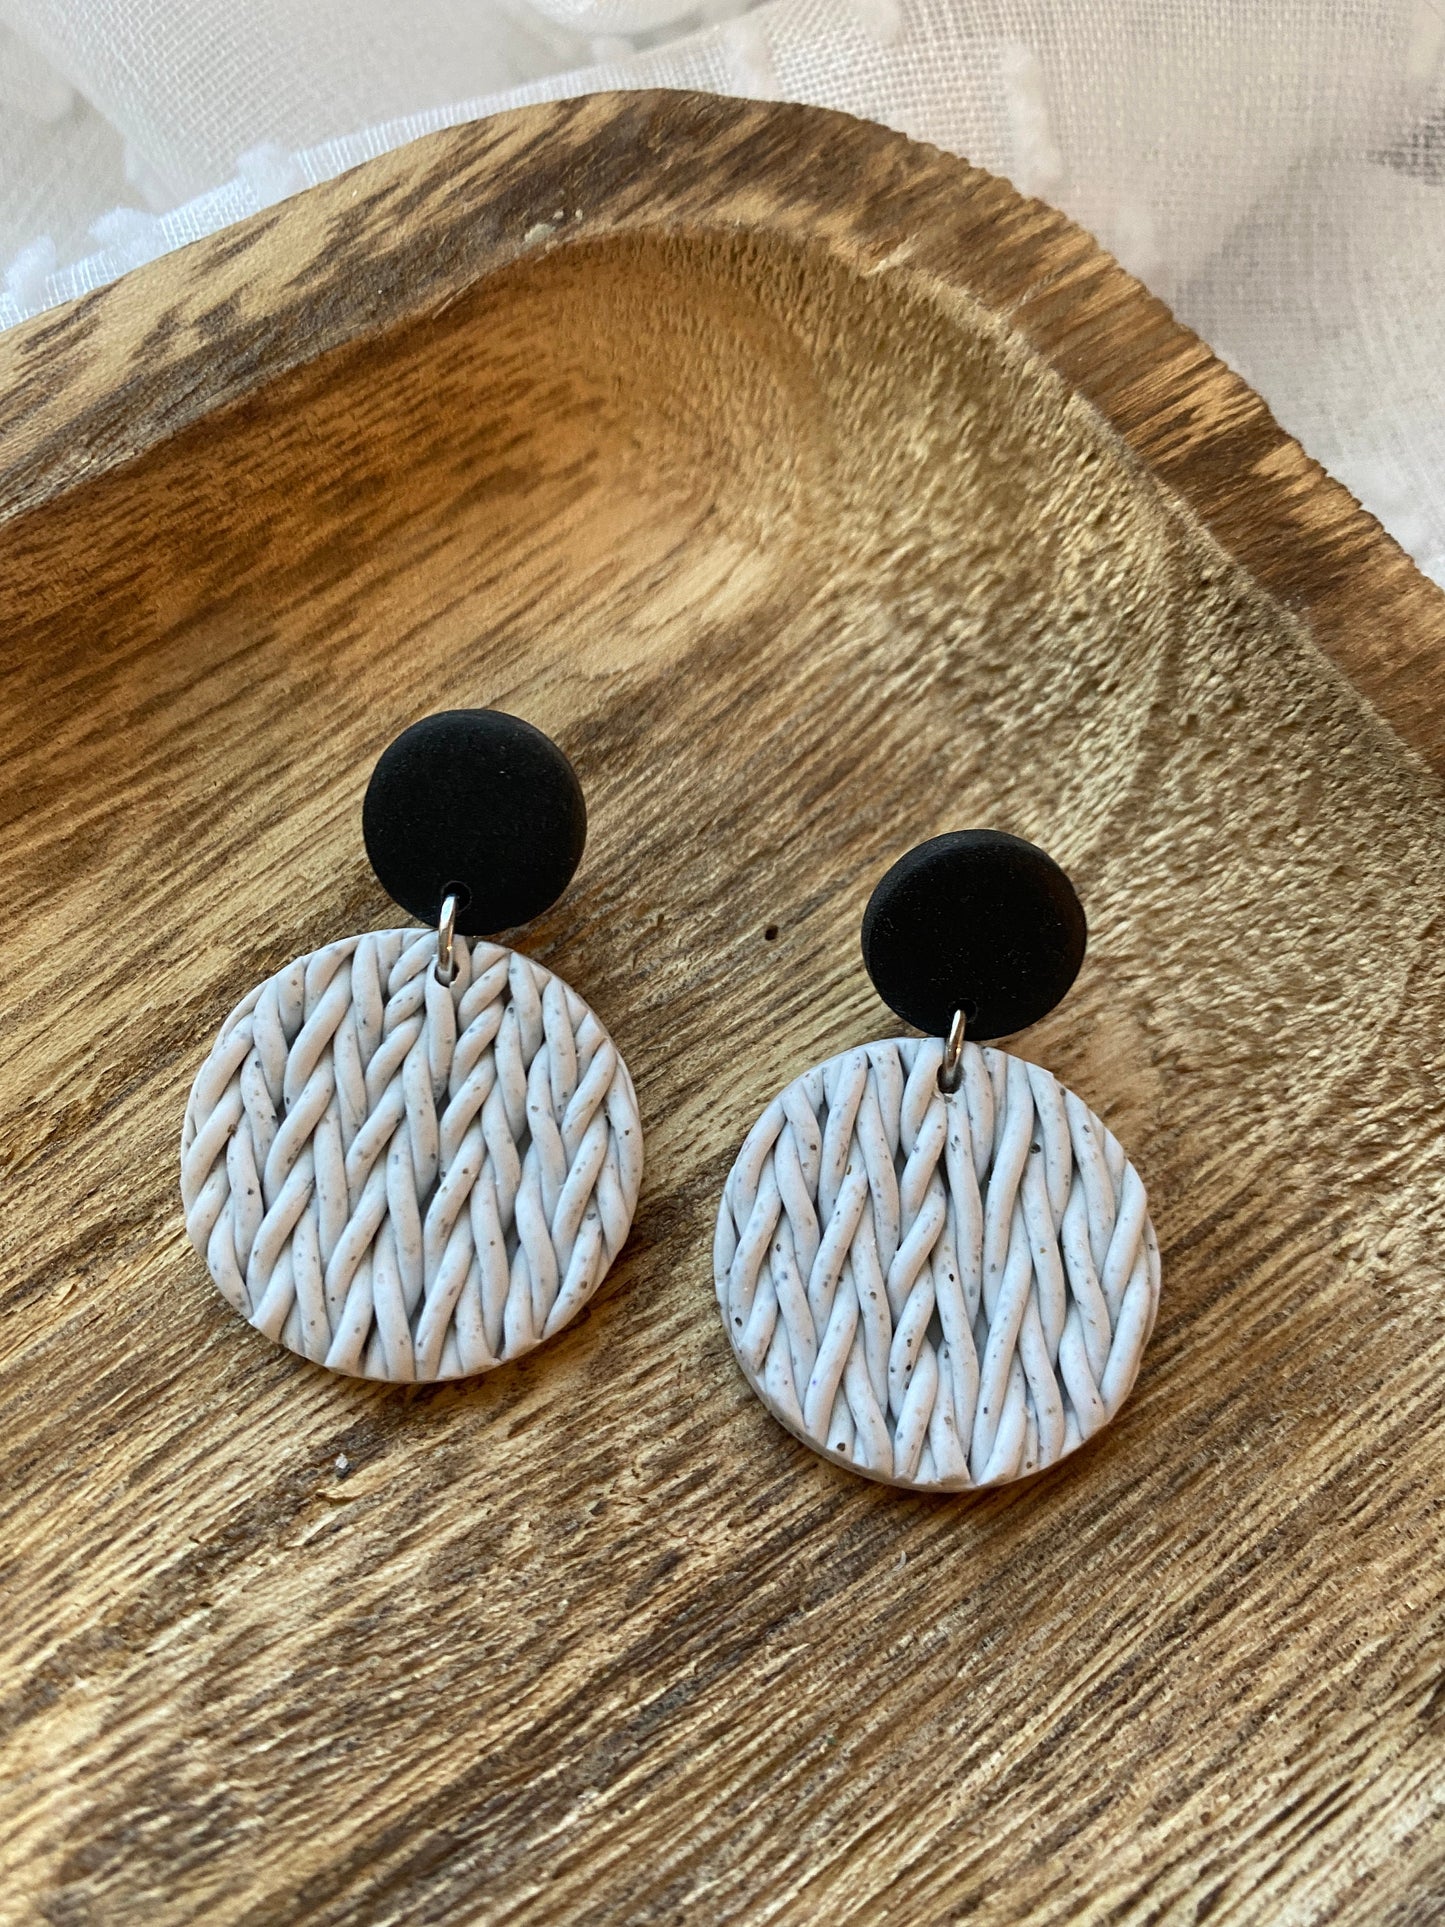 Clay Earrings Handmade | Knitted Speckled White and Black | Polymer Clay | Winter | Small Circle Earring | Knit Style Clay Earrings | Dainty